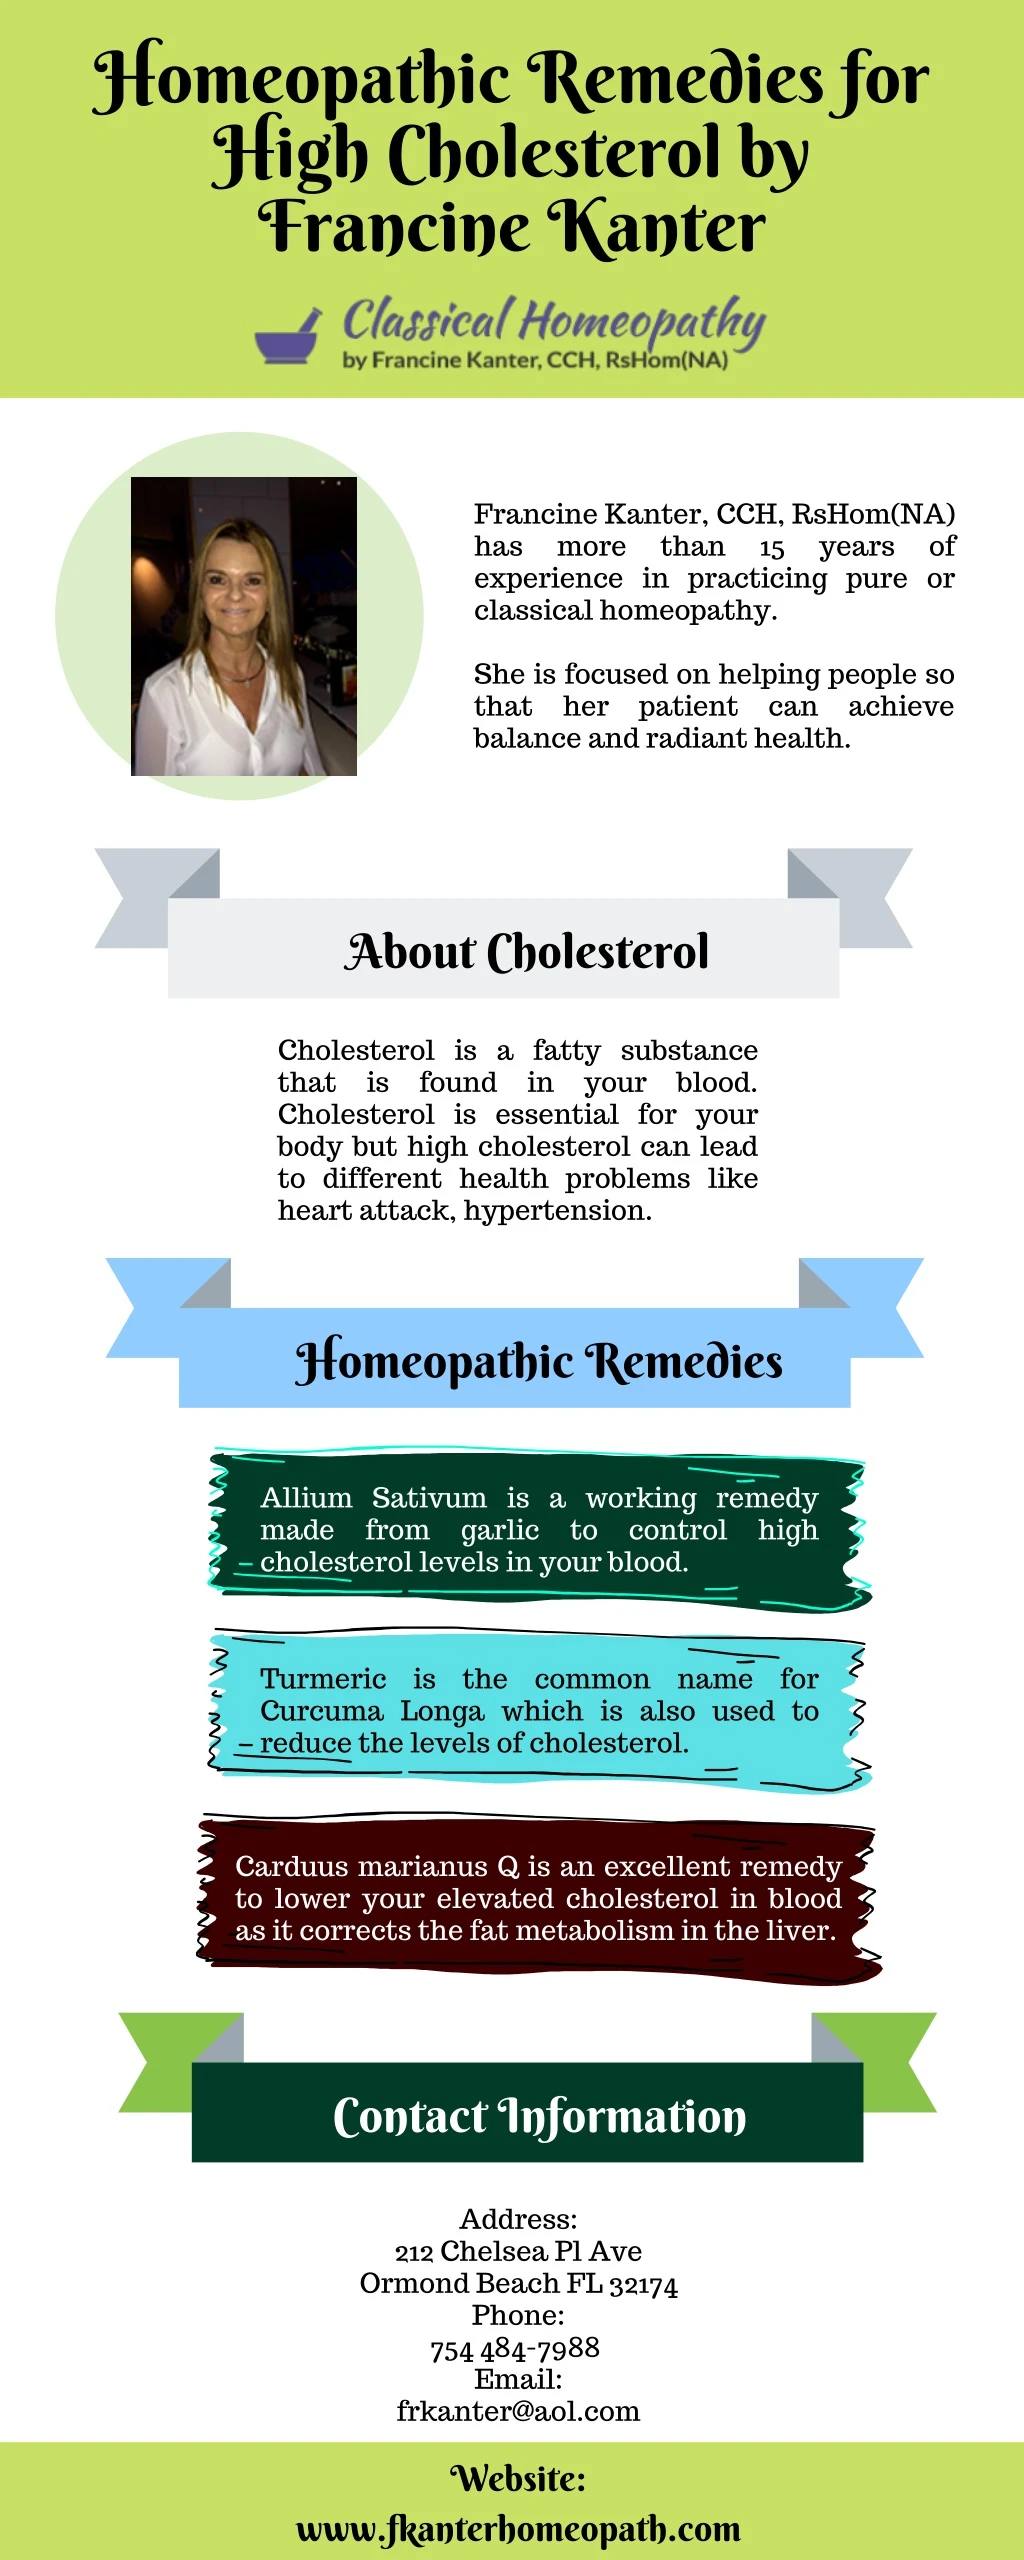 homeopathic remedies for high cholesterol